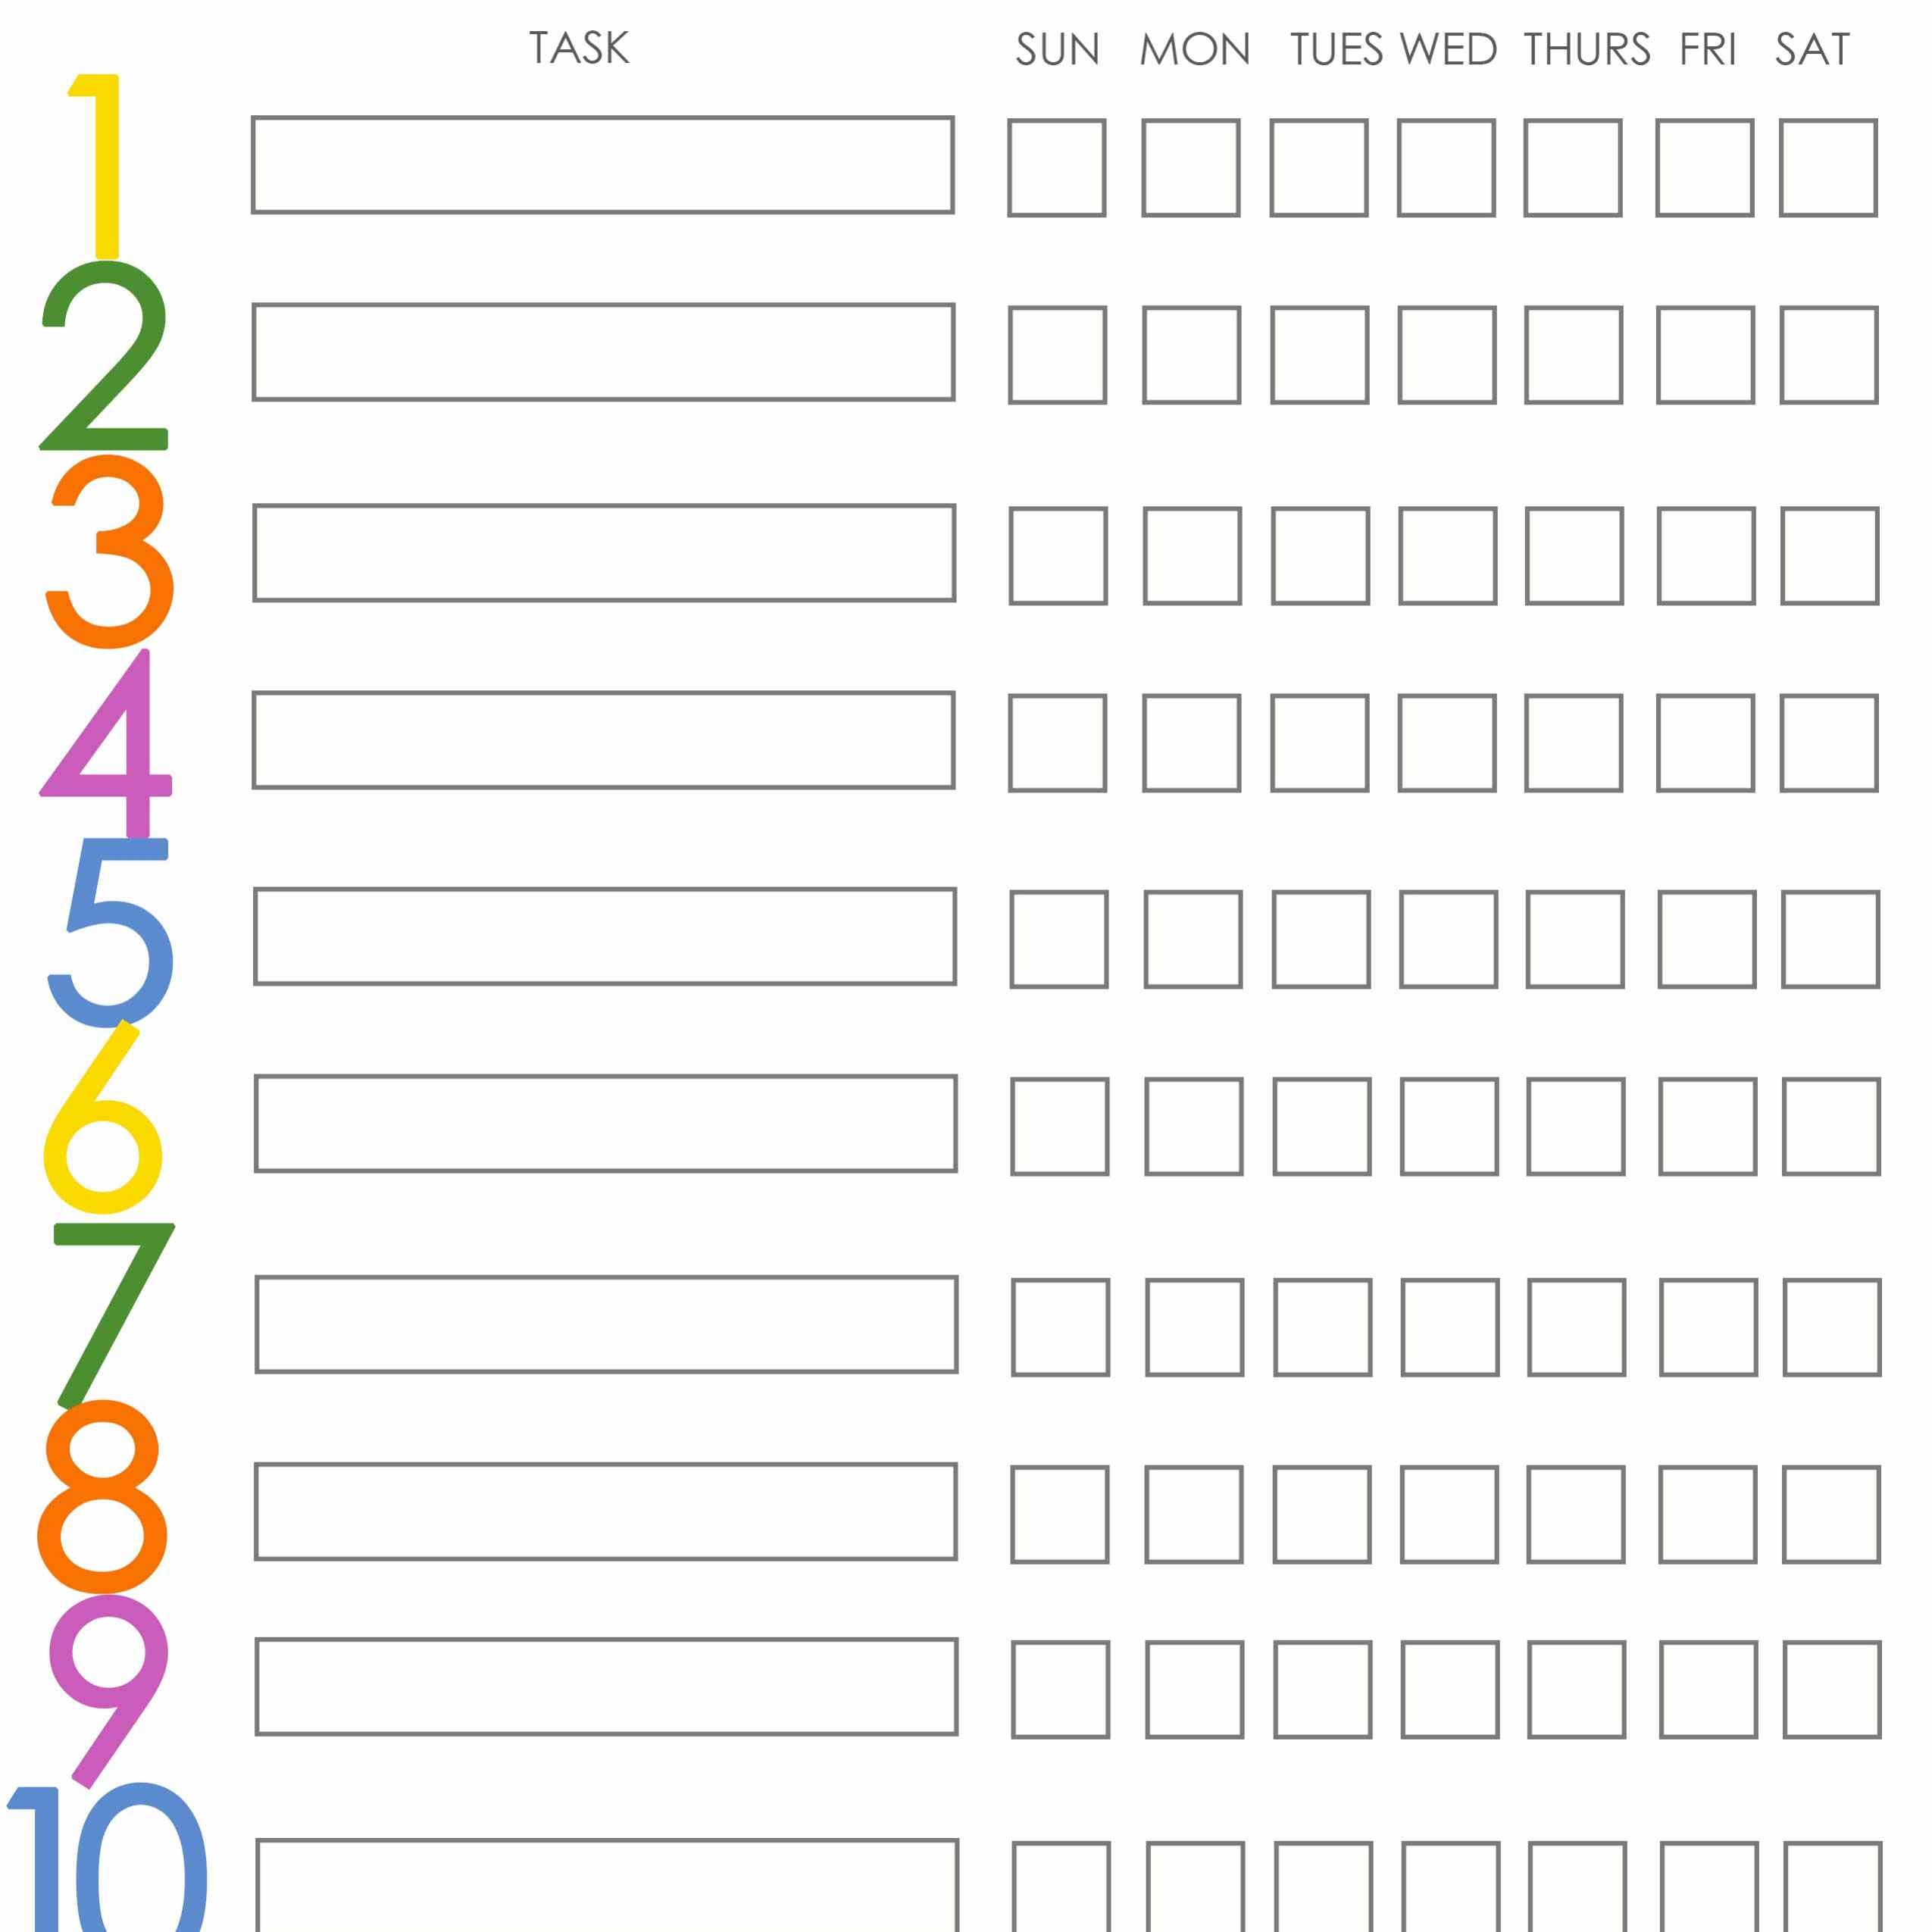 Free Printable Weekly Chore Charts - Free Printable Chore Charts For Kids With Pictures